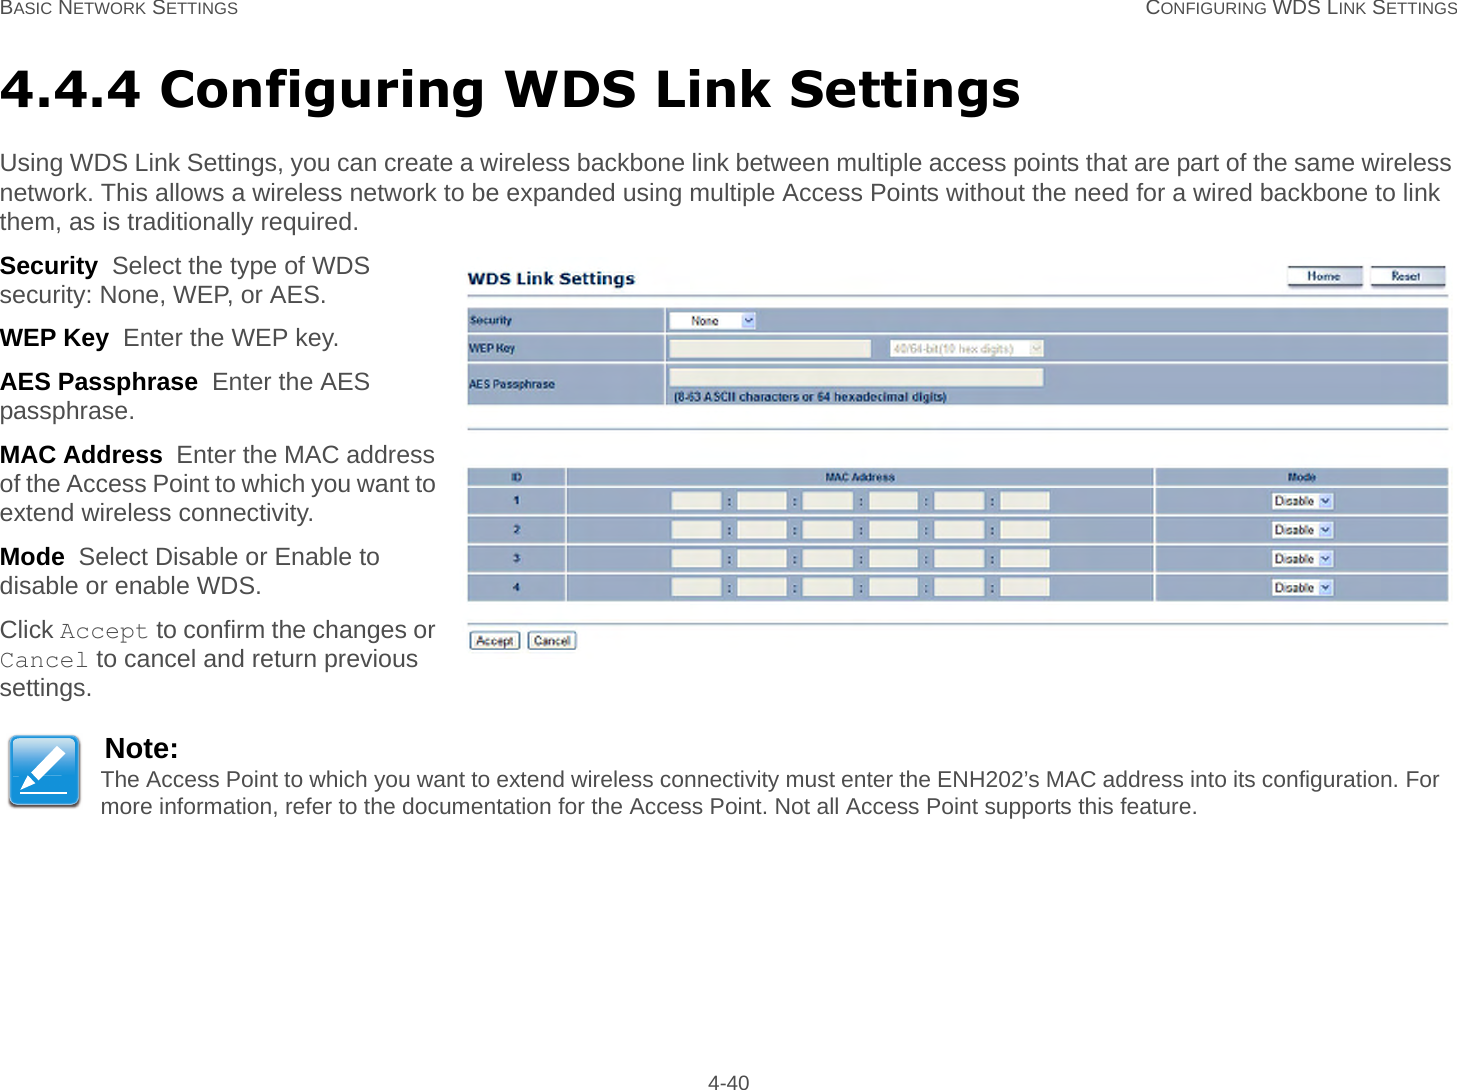 BASIC NETWORK SETTINGS CONFIGURING WDS LINK SETTINGS 4-404.4.4 Configuring WDS Link SettingsUsing WDS Link Settings, you can create a wireless backbone link between multiple access points that are part of the same wireless network. This allows a wireless network to be expanded using multiple Access Points without the need for a wired backbone to link them, as is traditionally required.Security  Select the type of WDS security: None, WEP, or AES.WEP Key  Enter the WEP key.AES Passphrase  Enter the AES passphrase.MAC Address  Enter the MAC address of the Access Point to which you want to extend wireless connectivity.Mode  Select Disable or Enable to disable or enable WDS.Click Accept to confirm the changes or Cancel to cancel and return previous settings.Note:The Access Point to which you want to extend wireless connectivity must enter the ENH202’s MAC address into its configuration. For more information, refer to the documentation for the Access Point. Not all Access Point supports this feature.